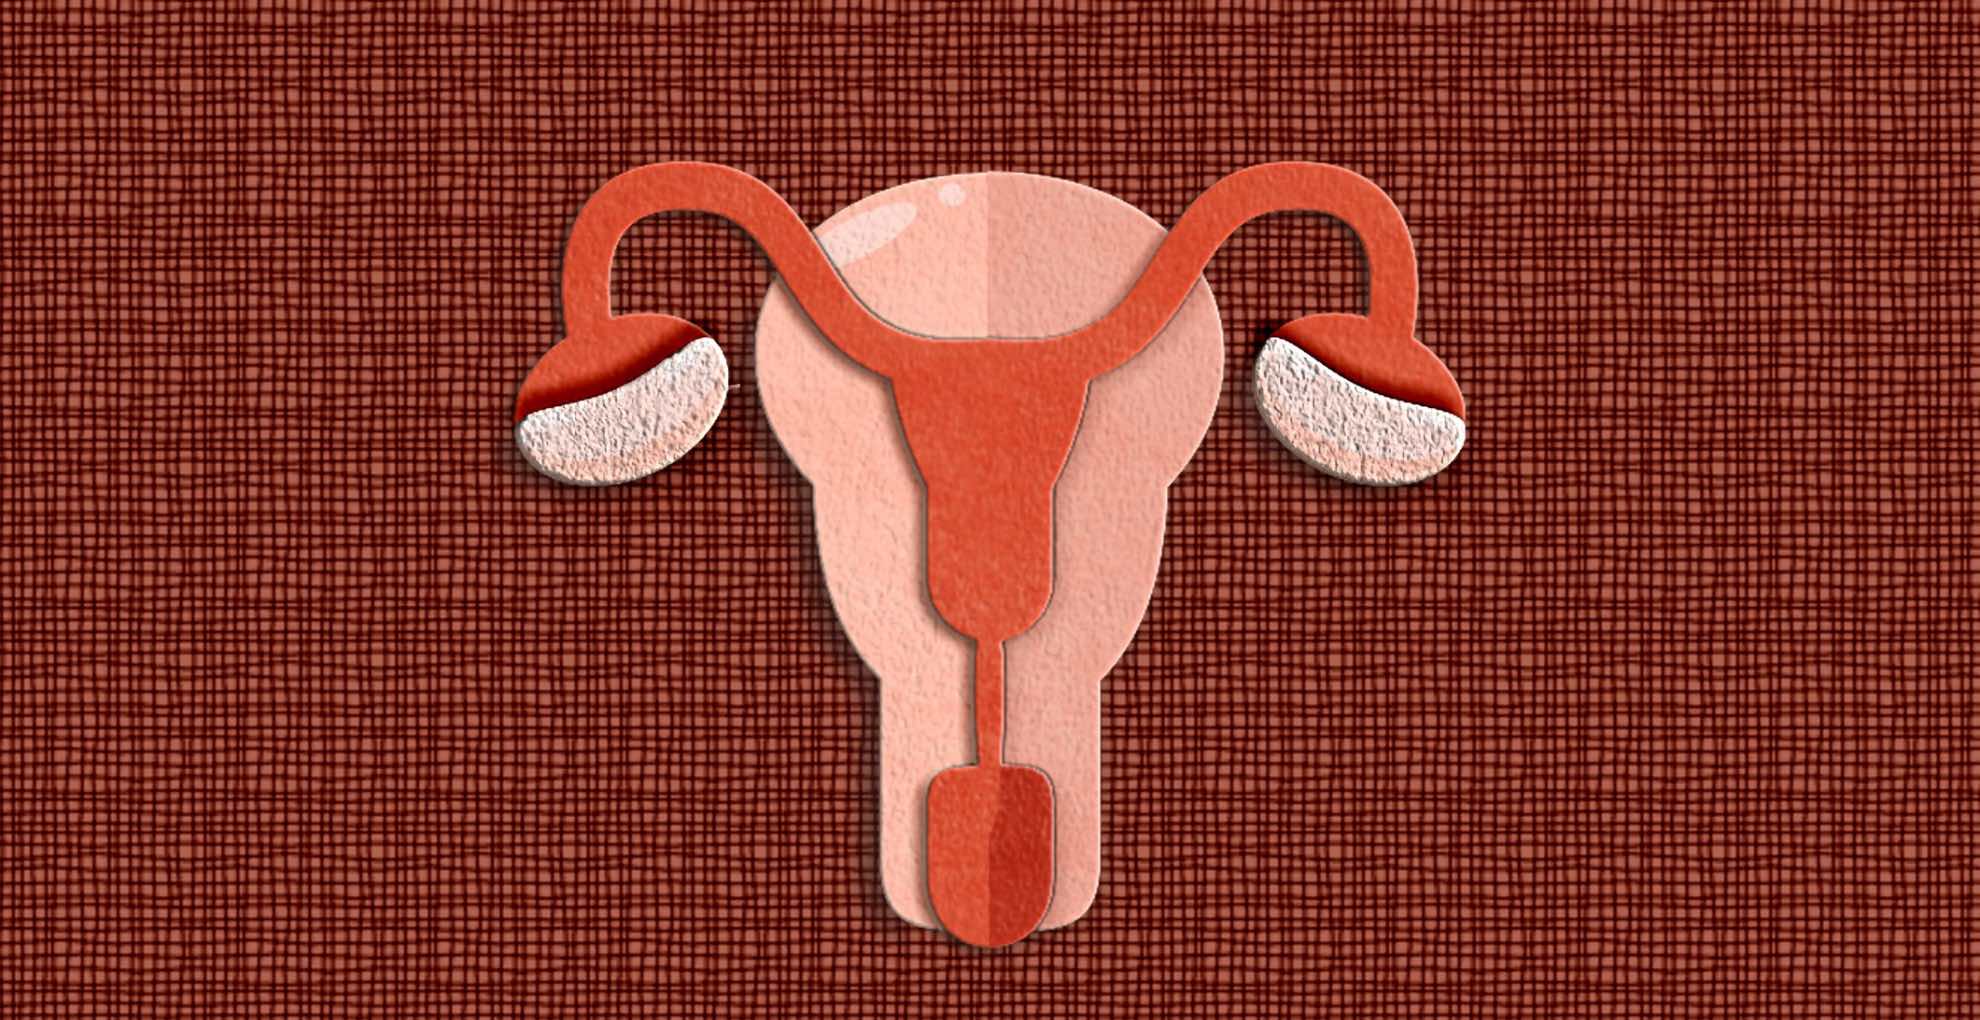 Paper art of the female female reproductive system